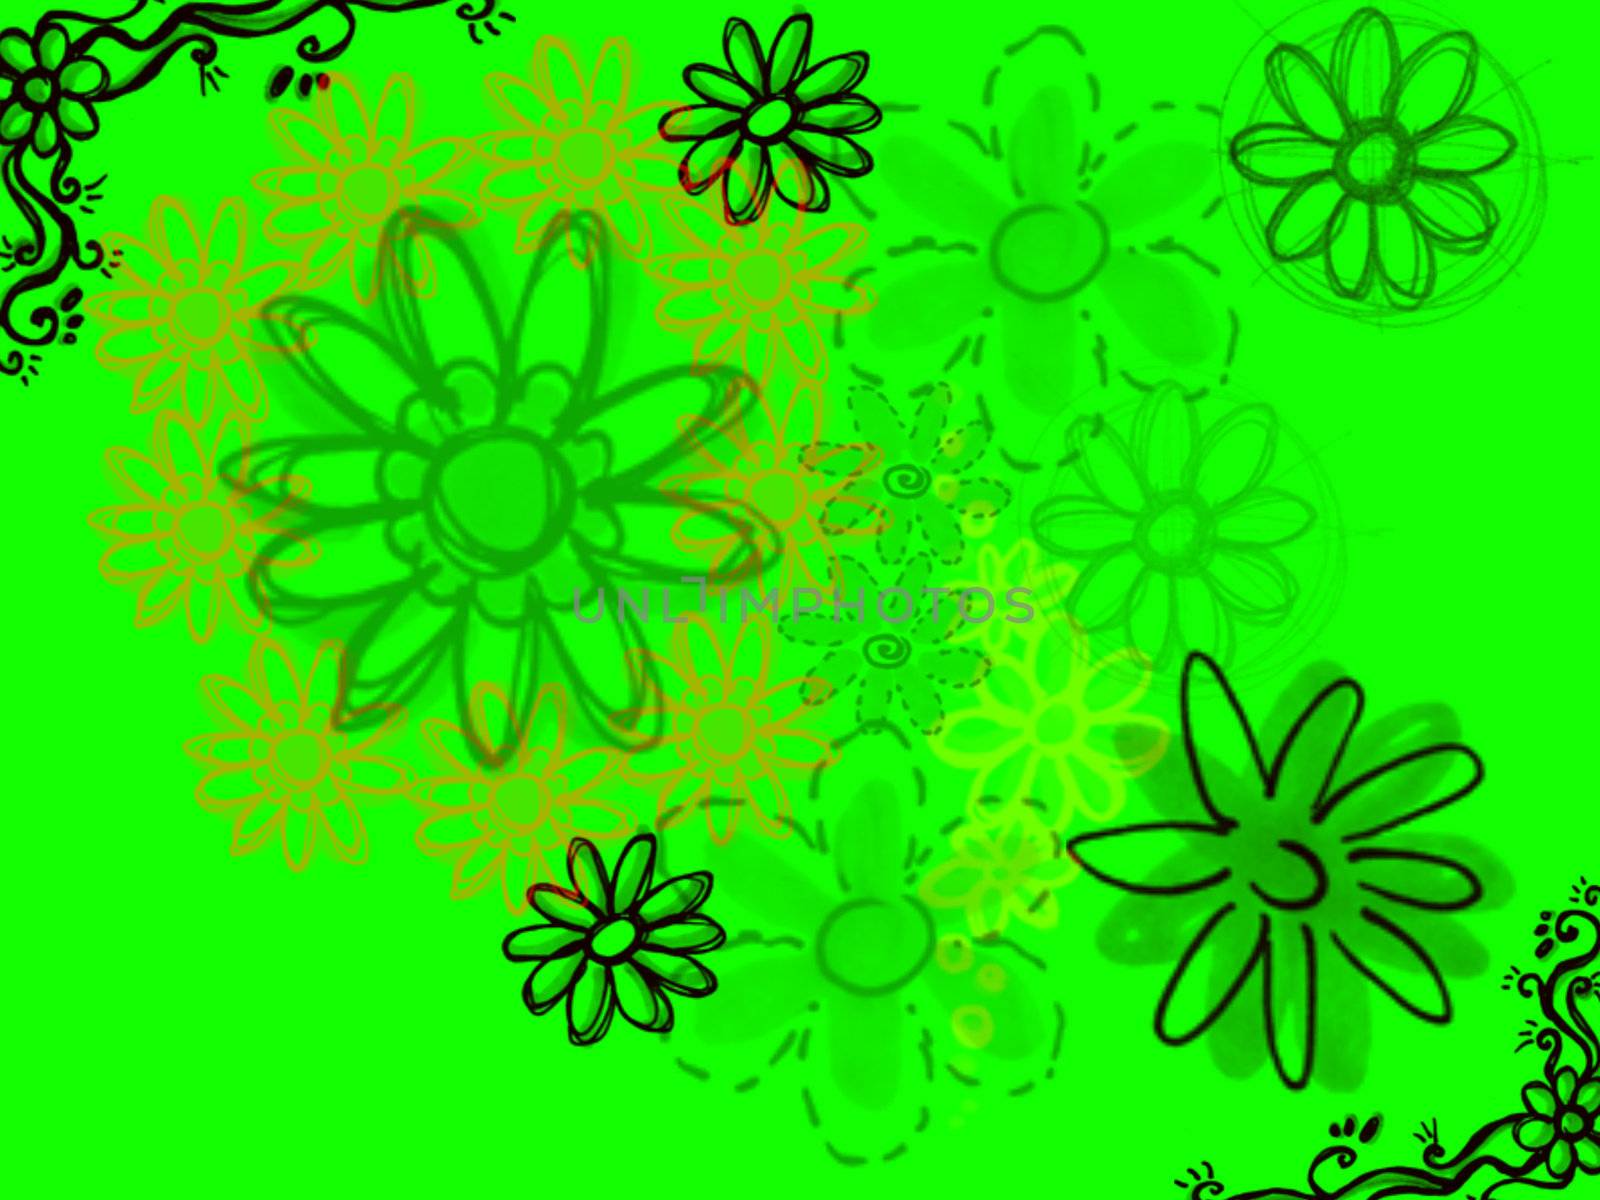 Sketched Flowers in Black on Bright Green by bobbigmac